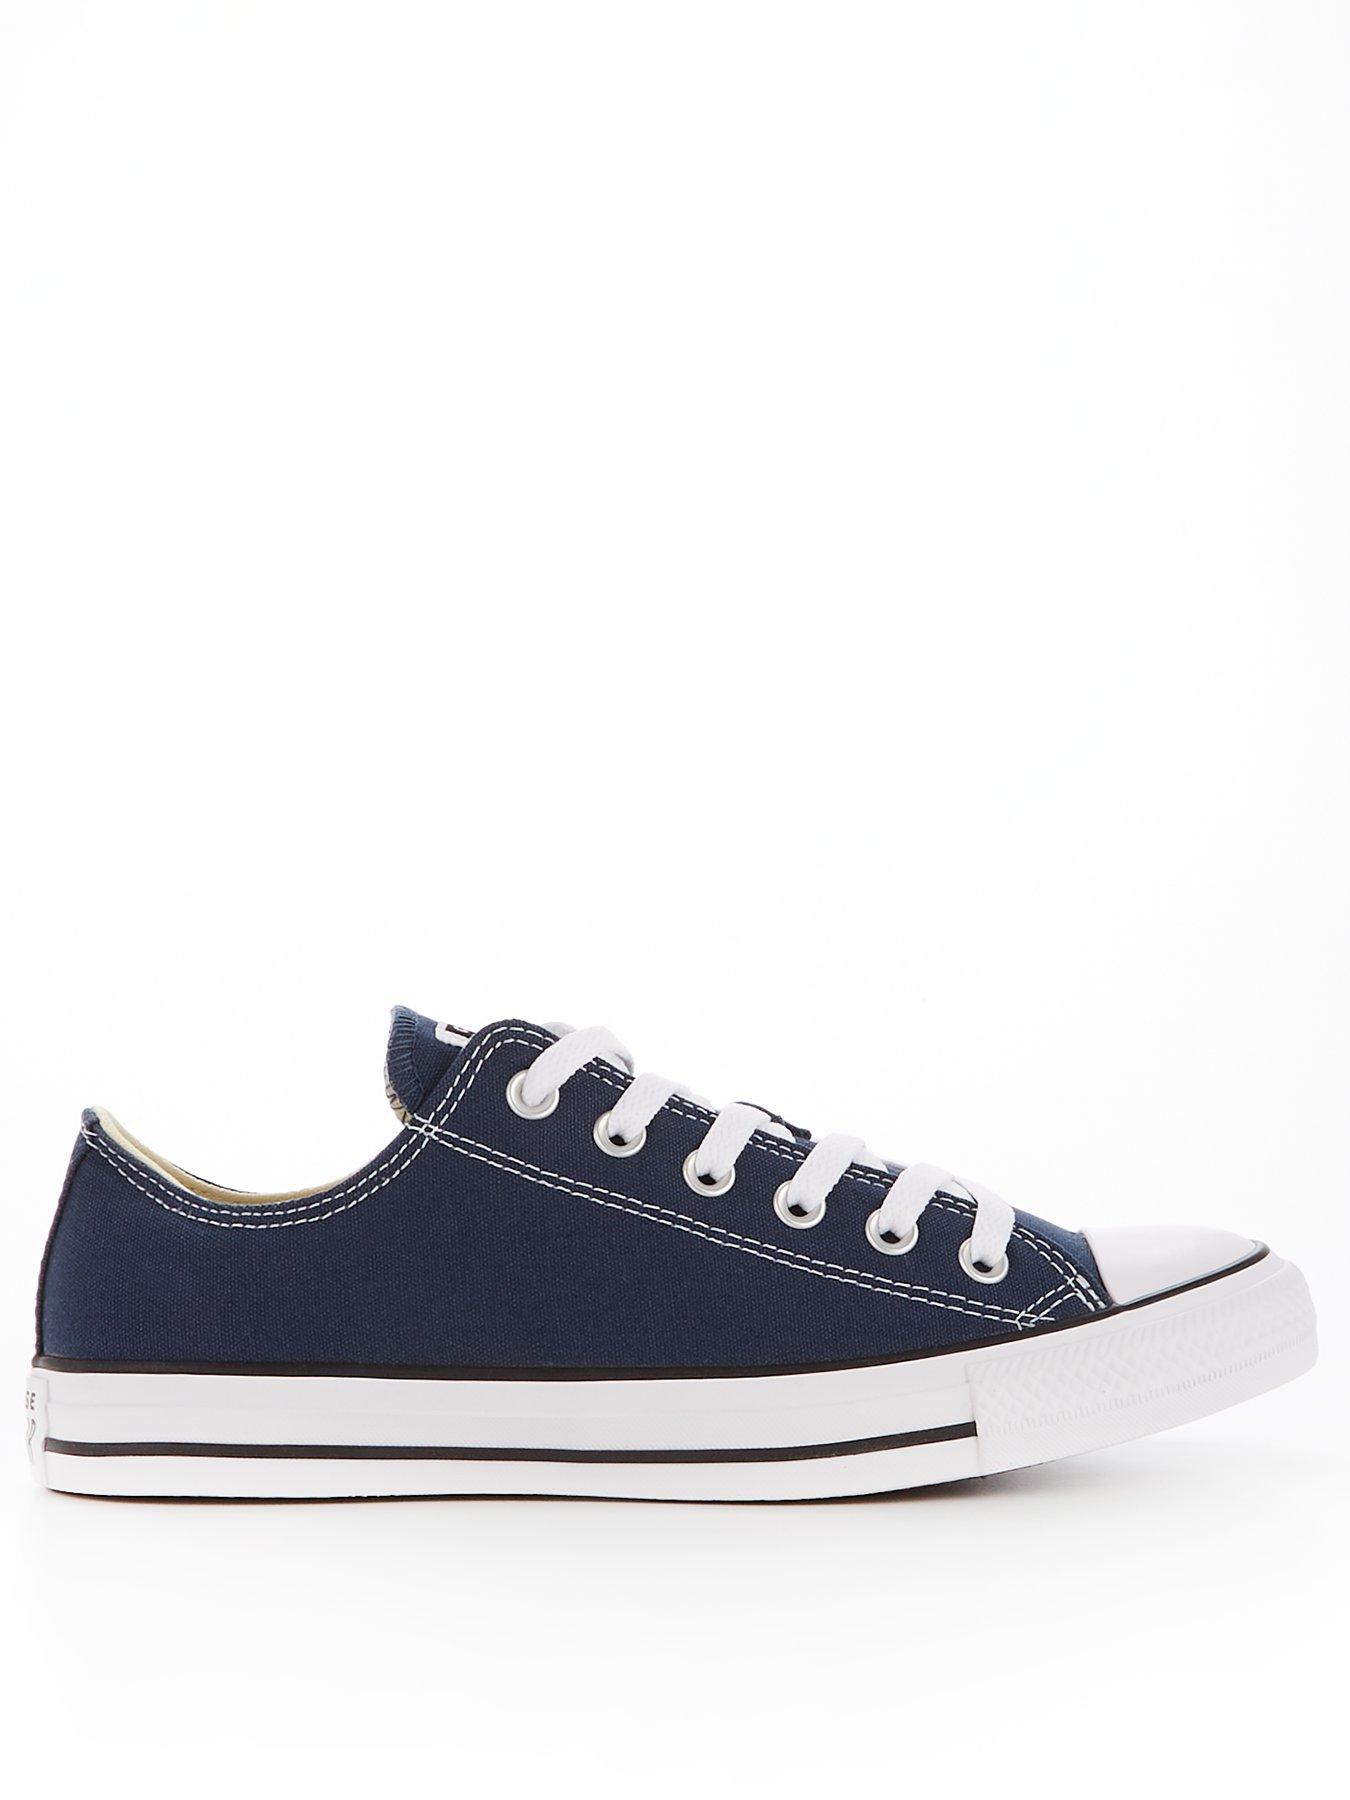  Chuck Taylor All Star Ox - Navy/White